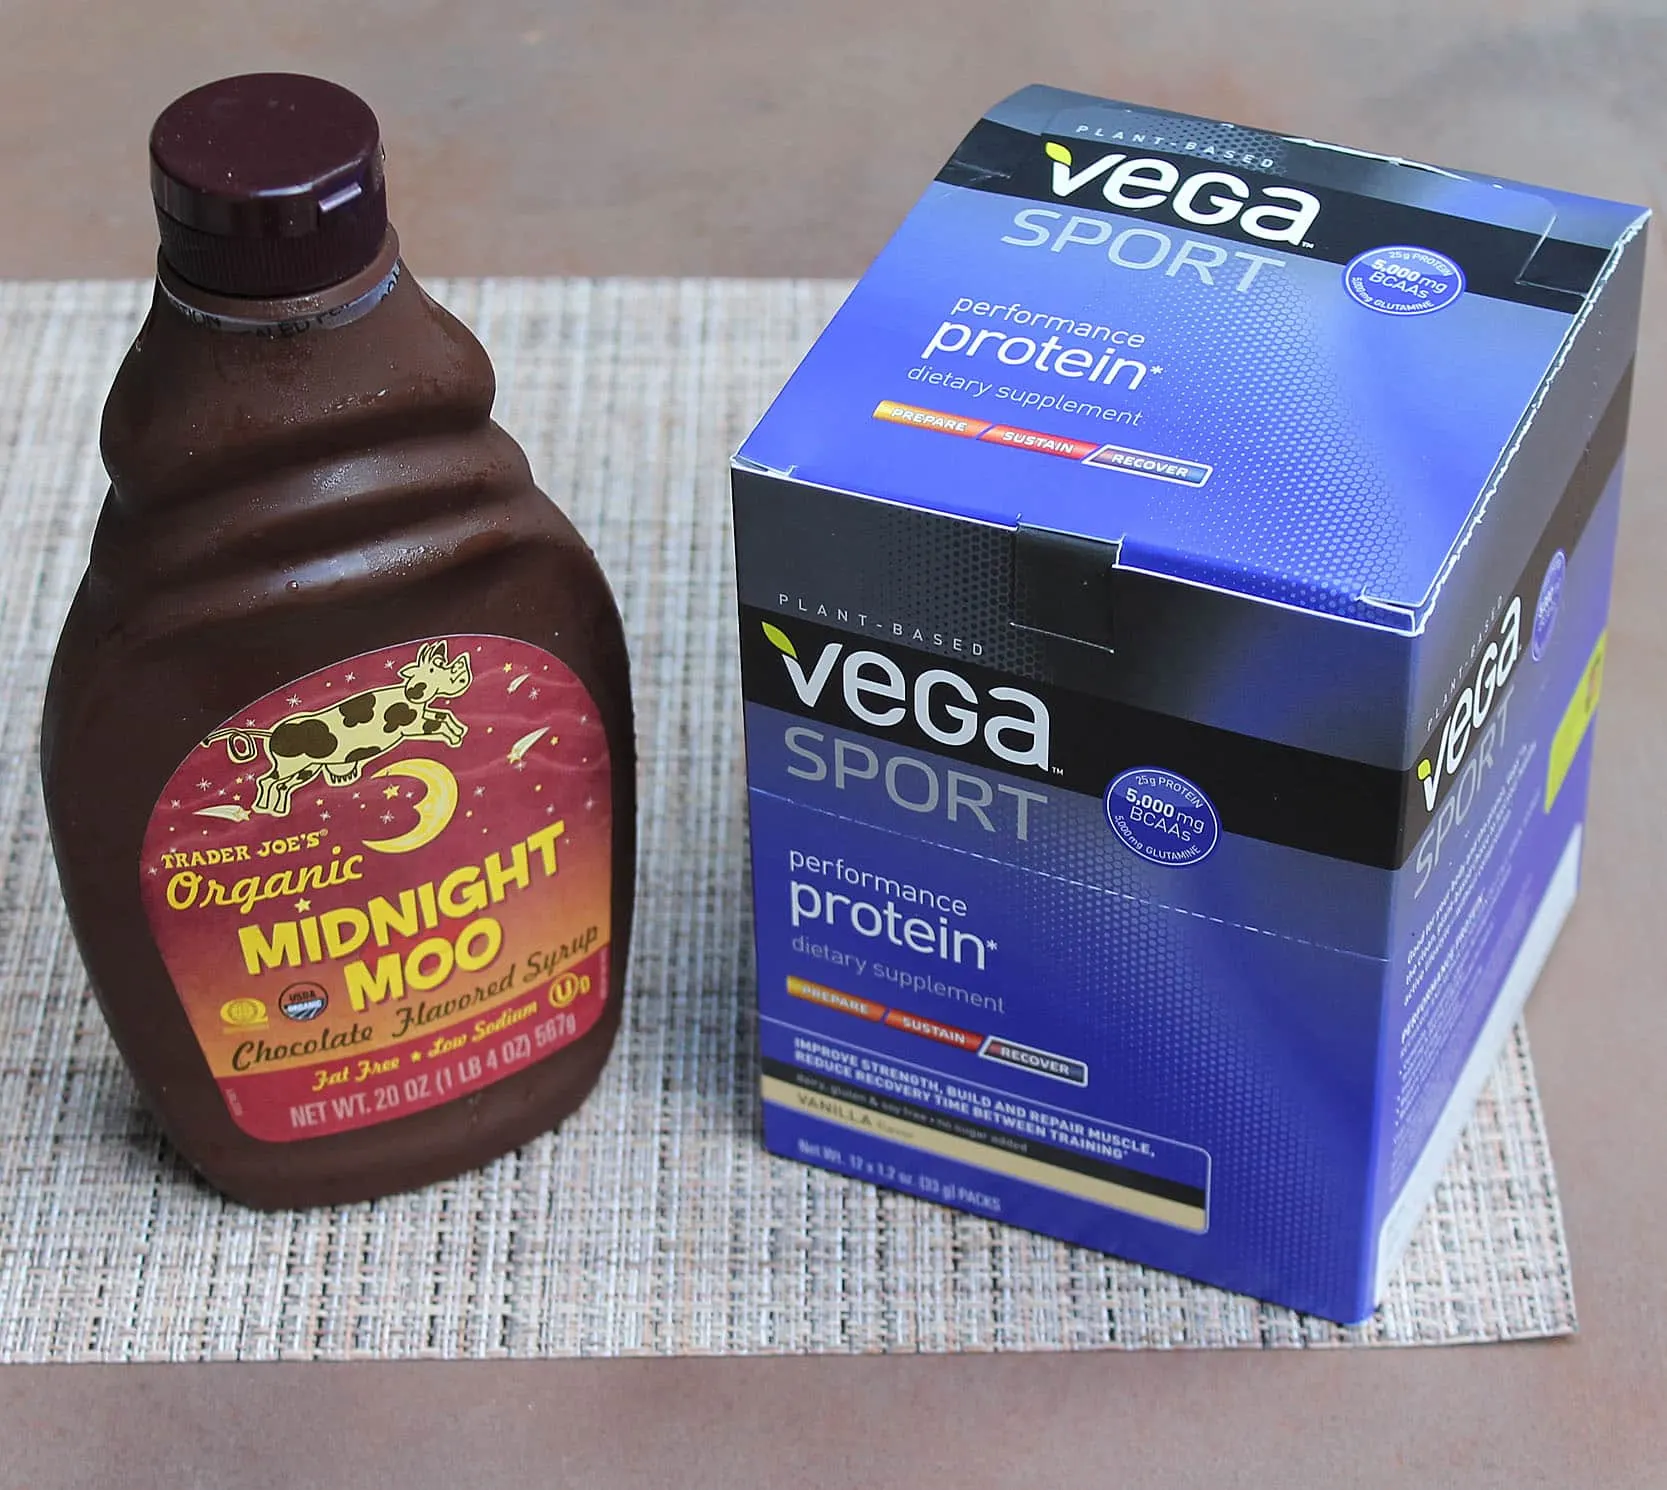 Vega Performance protein and chocolate syrup